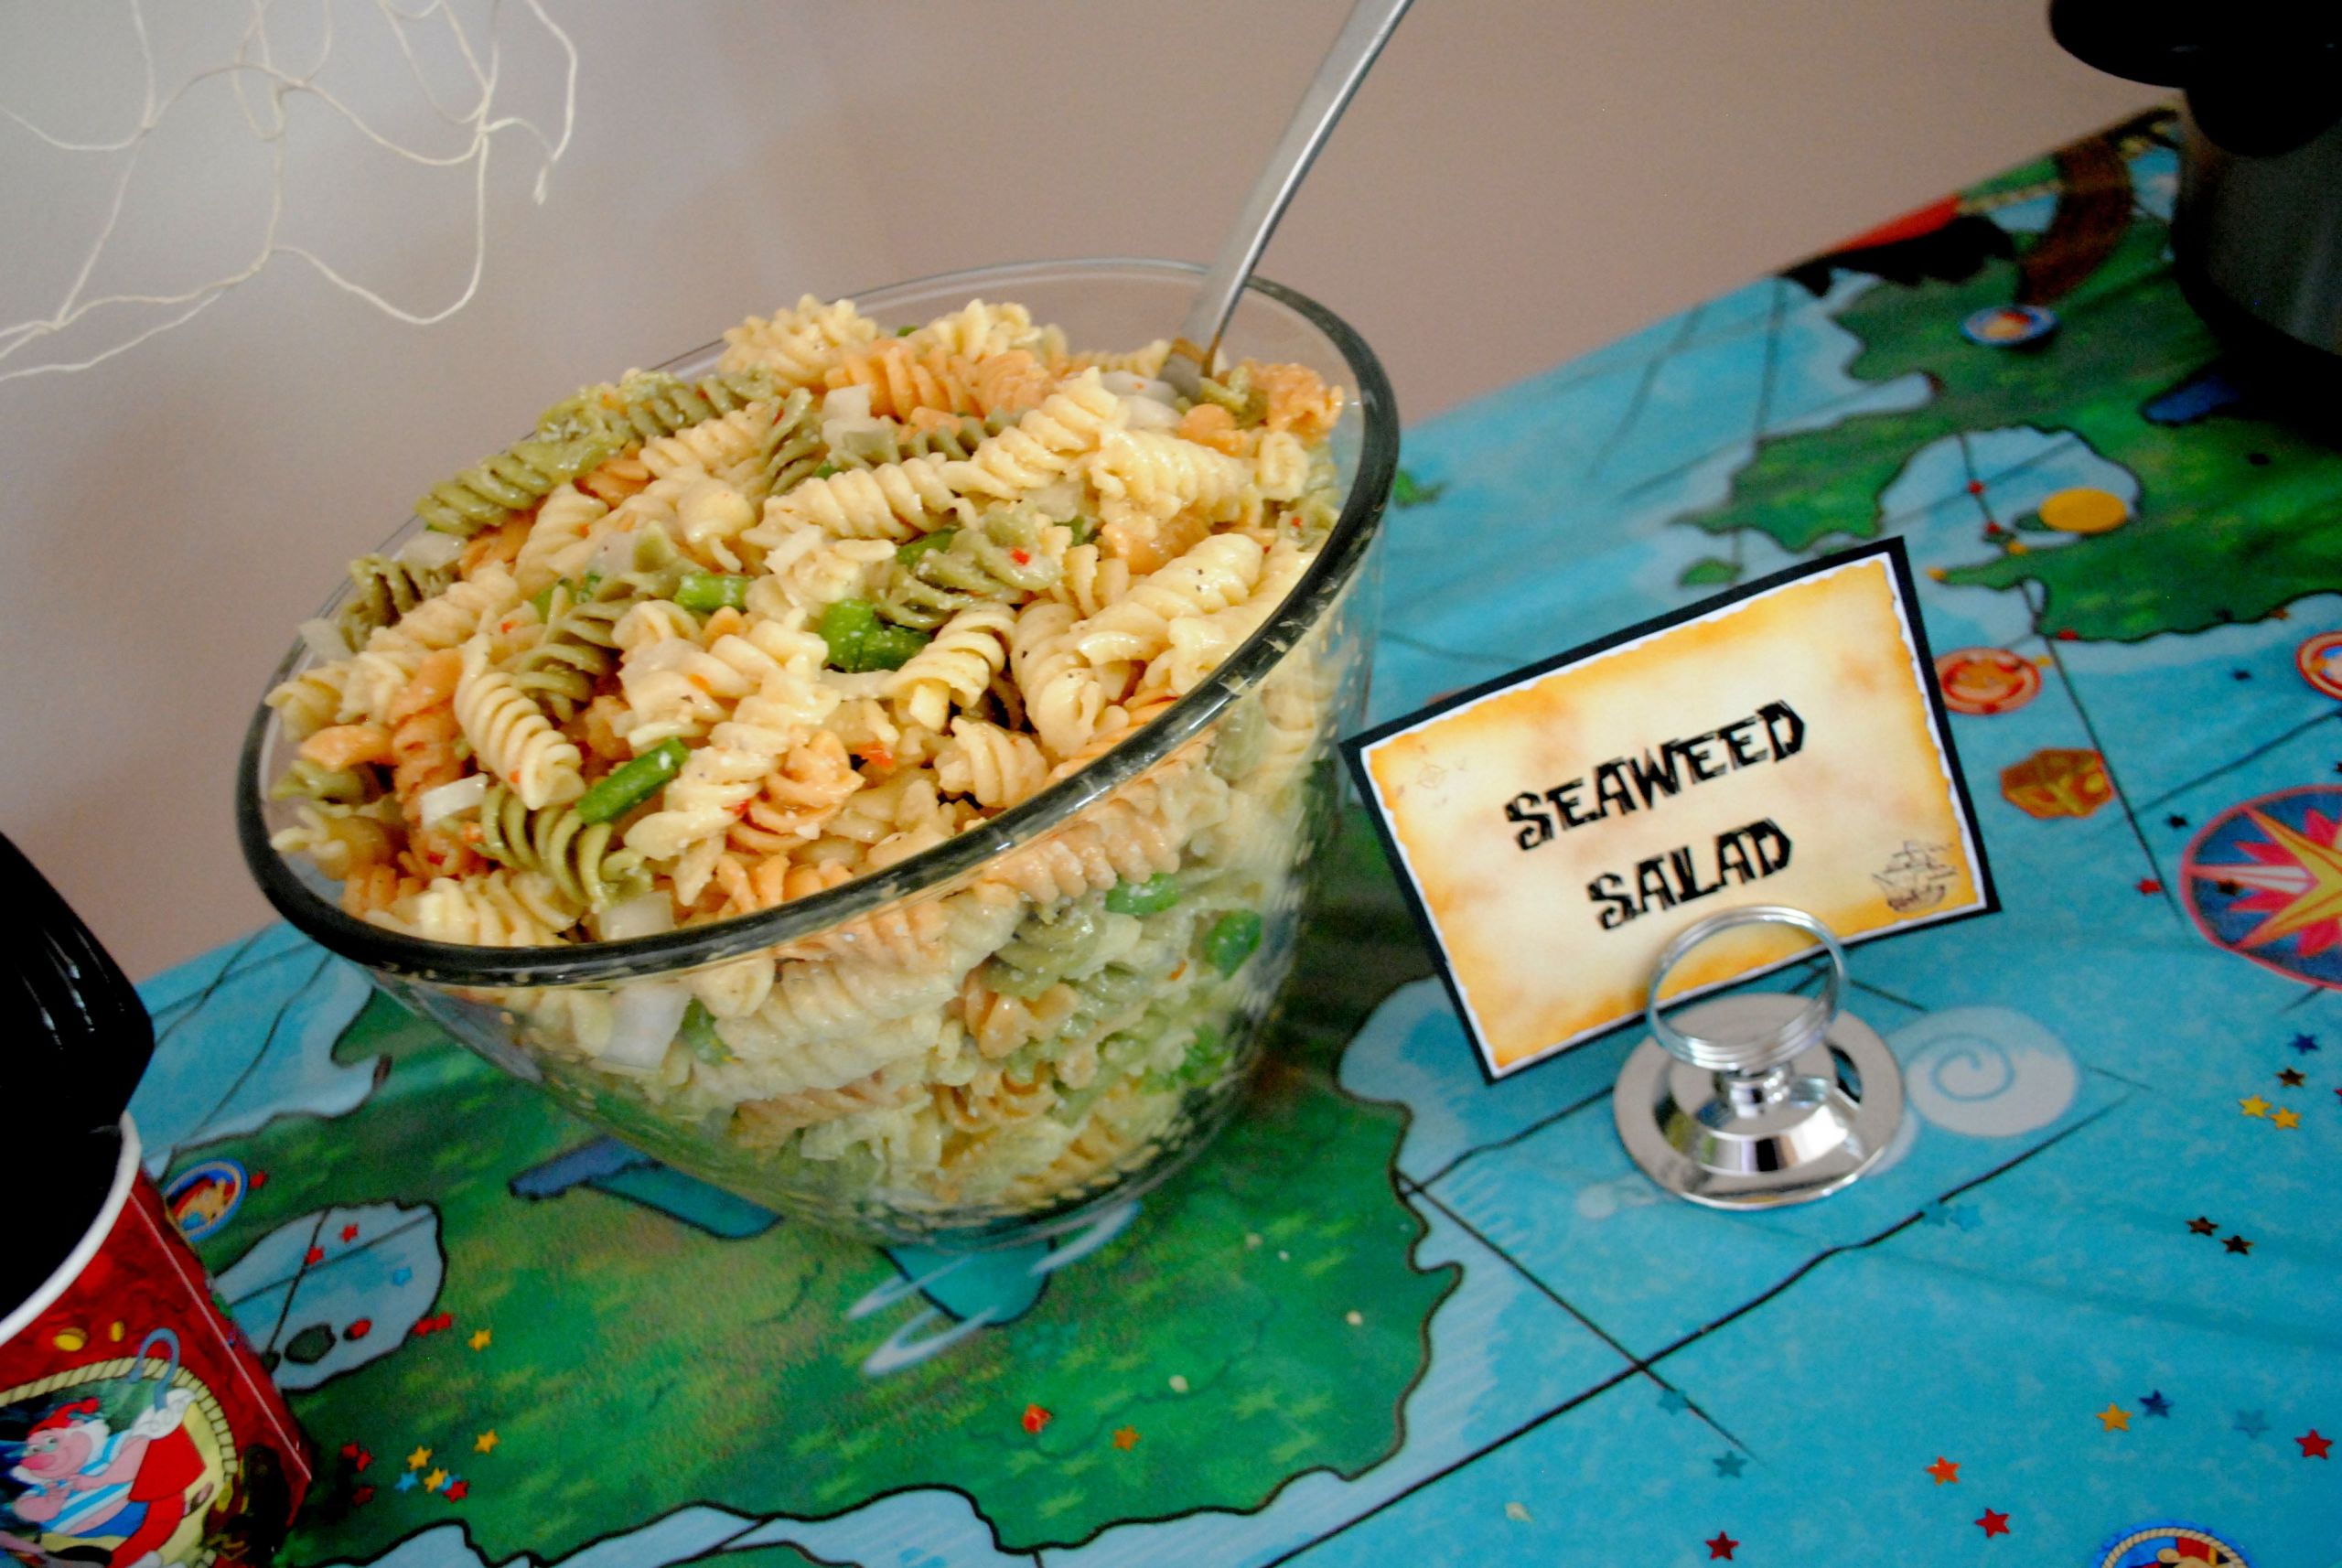 Jake And The Neverland Pirates Party Food Ideas
 Jake and the Neverland Pirates Party Food